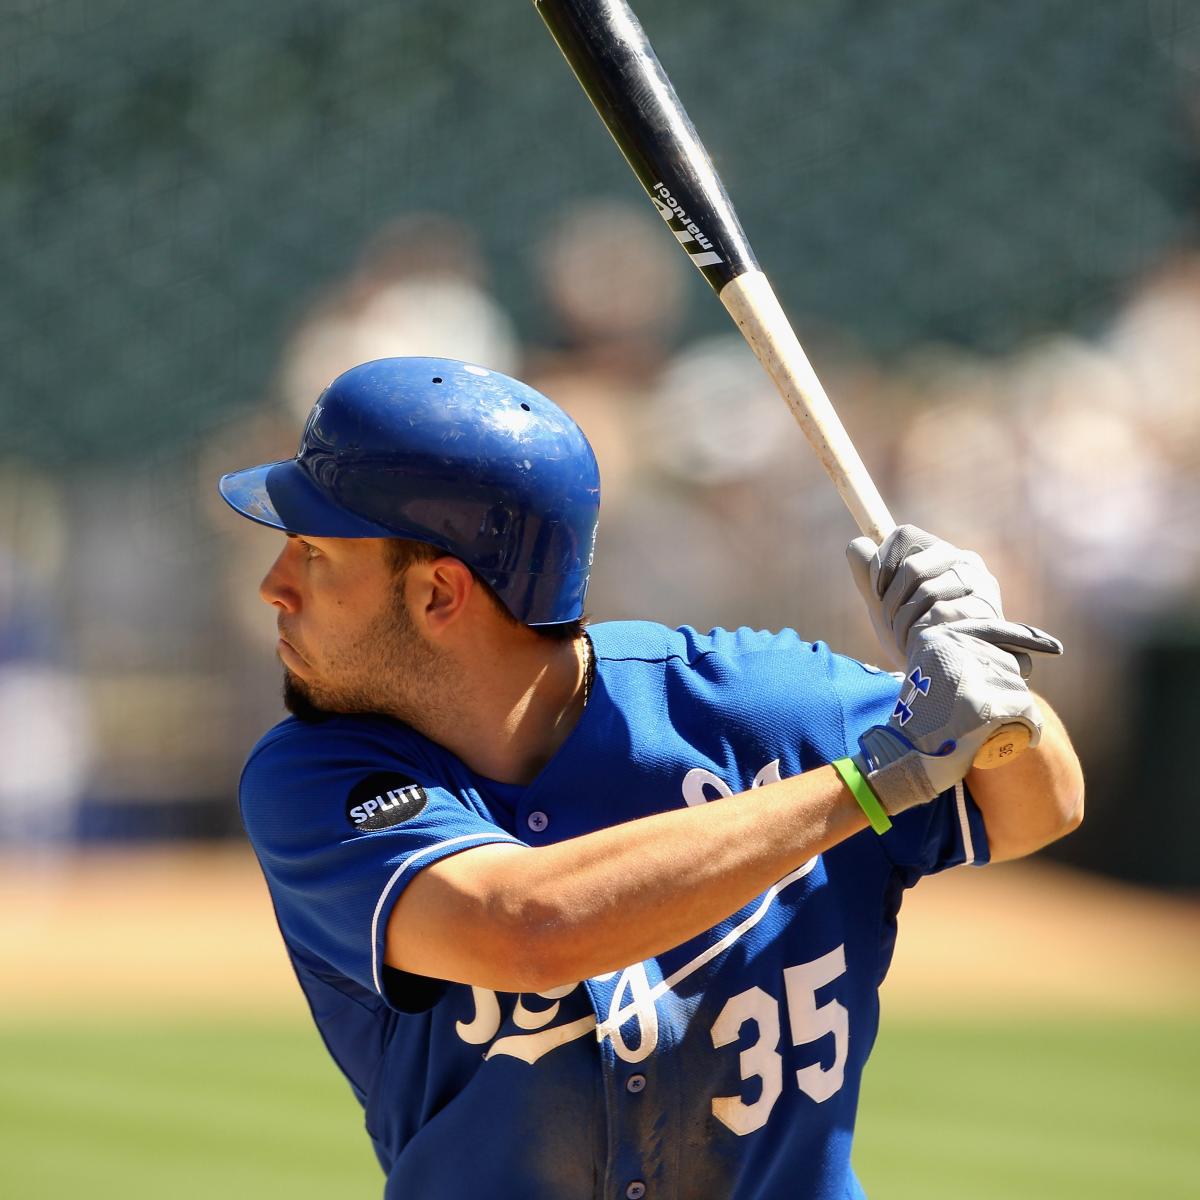 Fantasy Baseball Sleepers 2012 Sluggers You Don't Want to Live Without